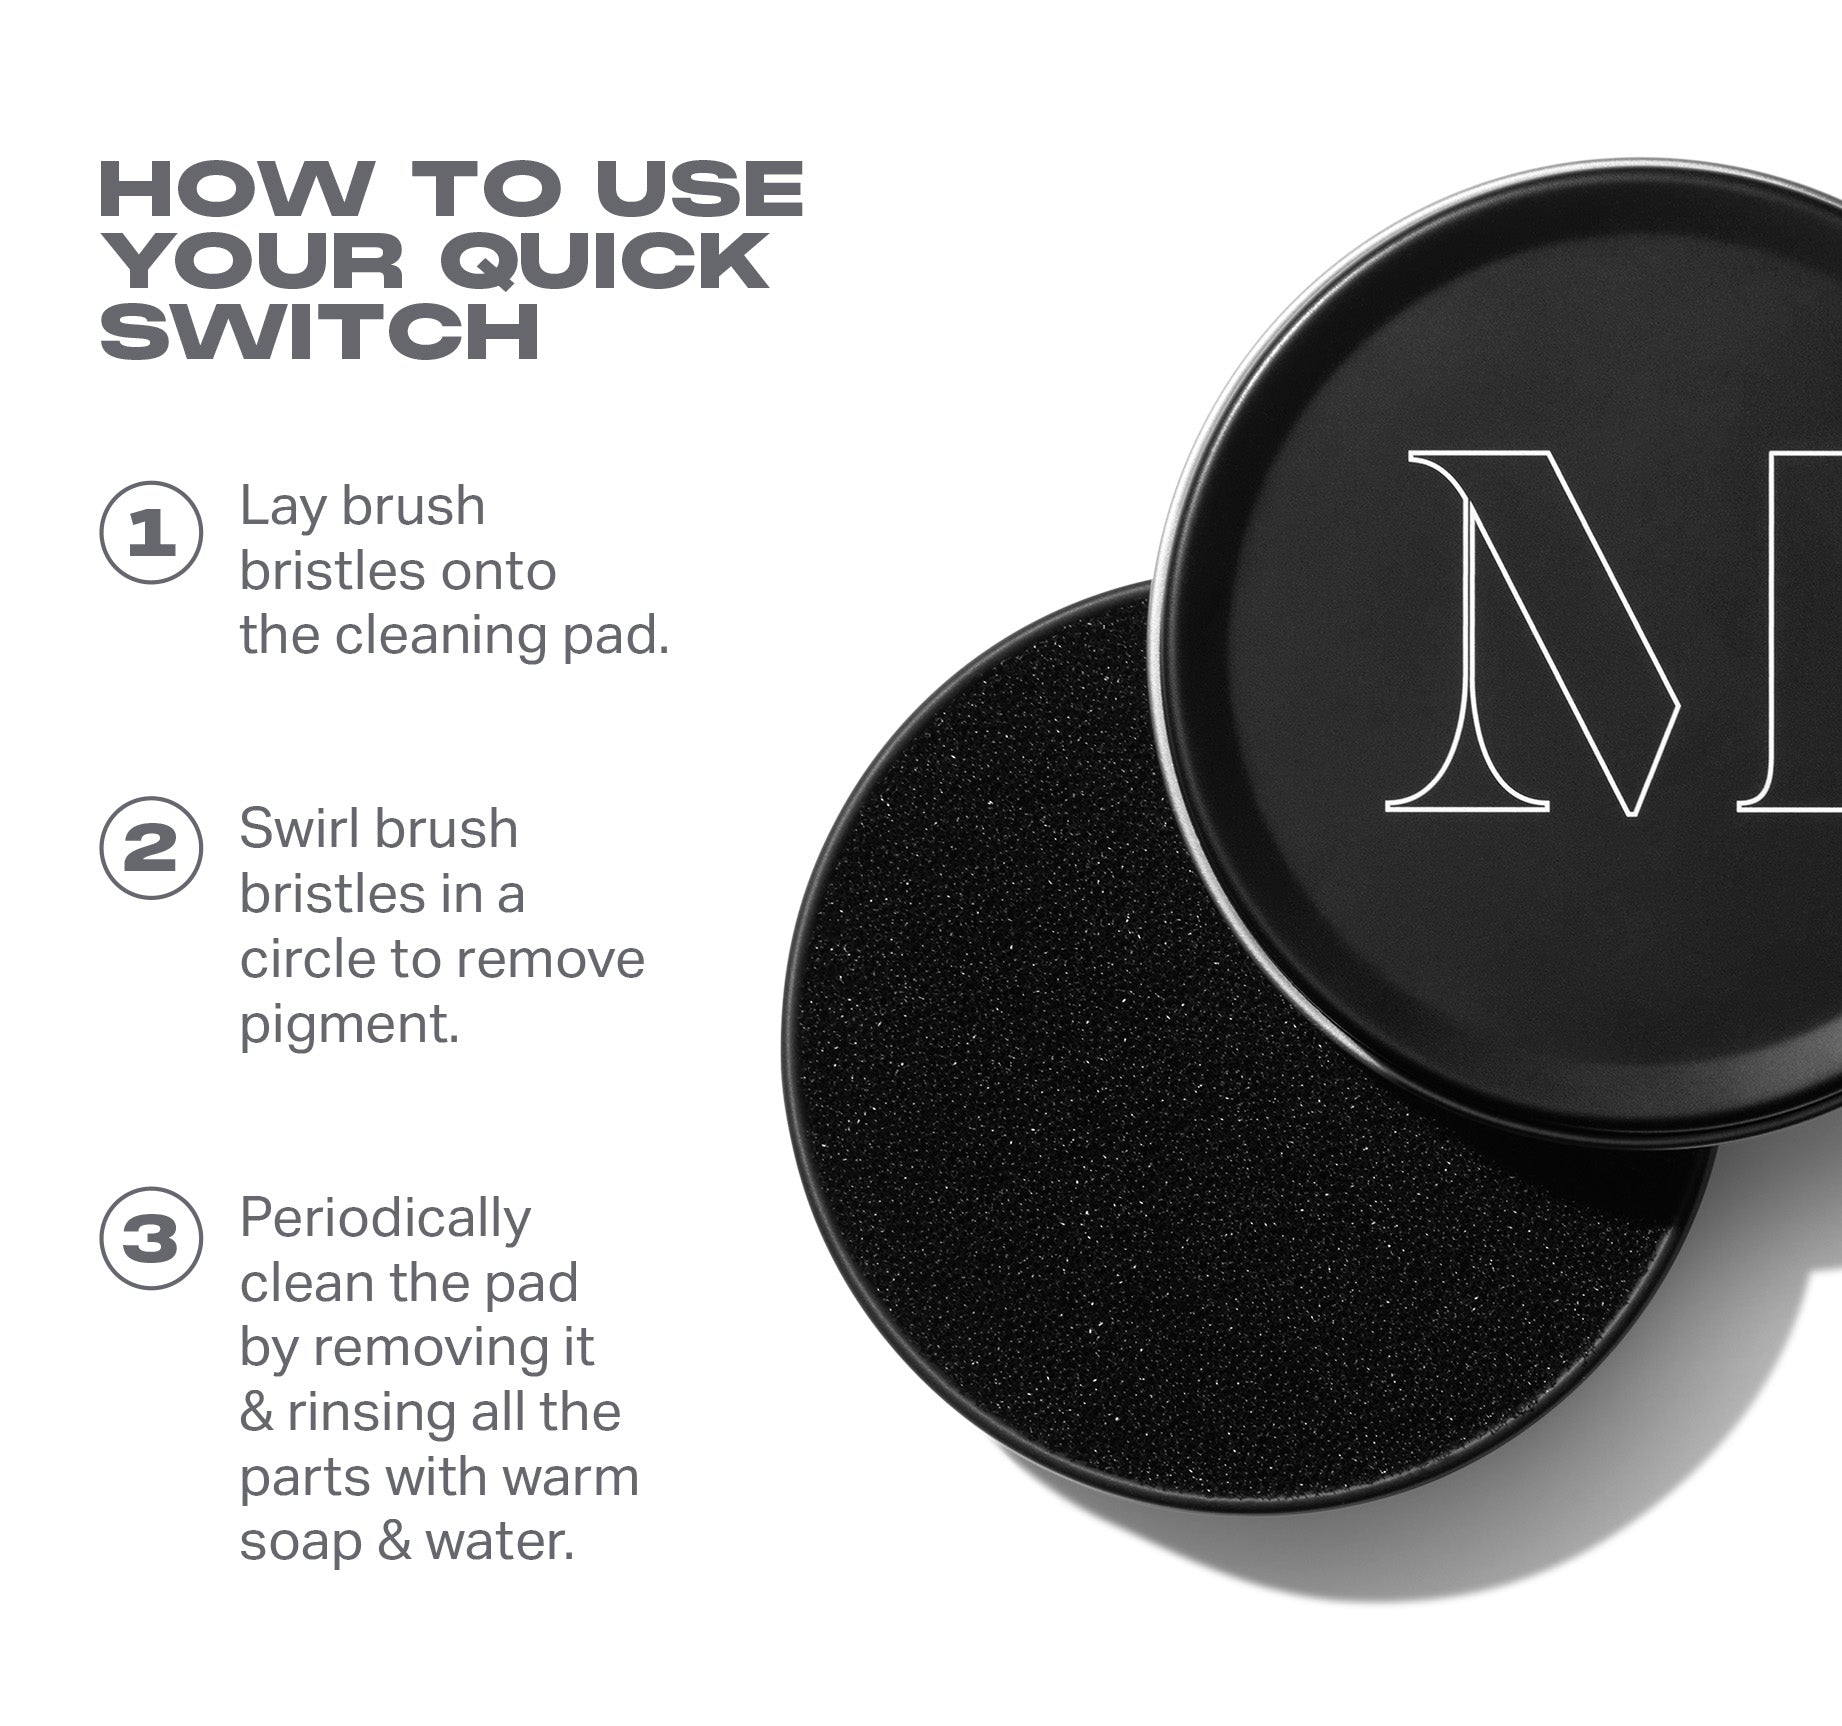 Quick Switch Dry Brush Cleaner - Image 2